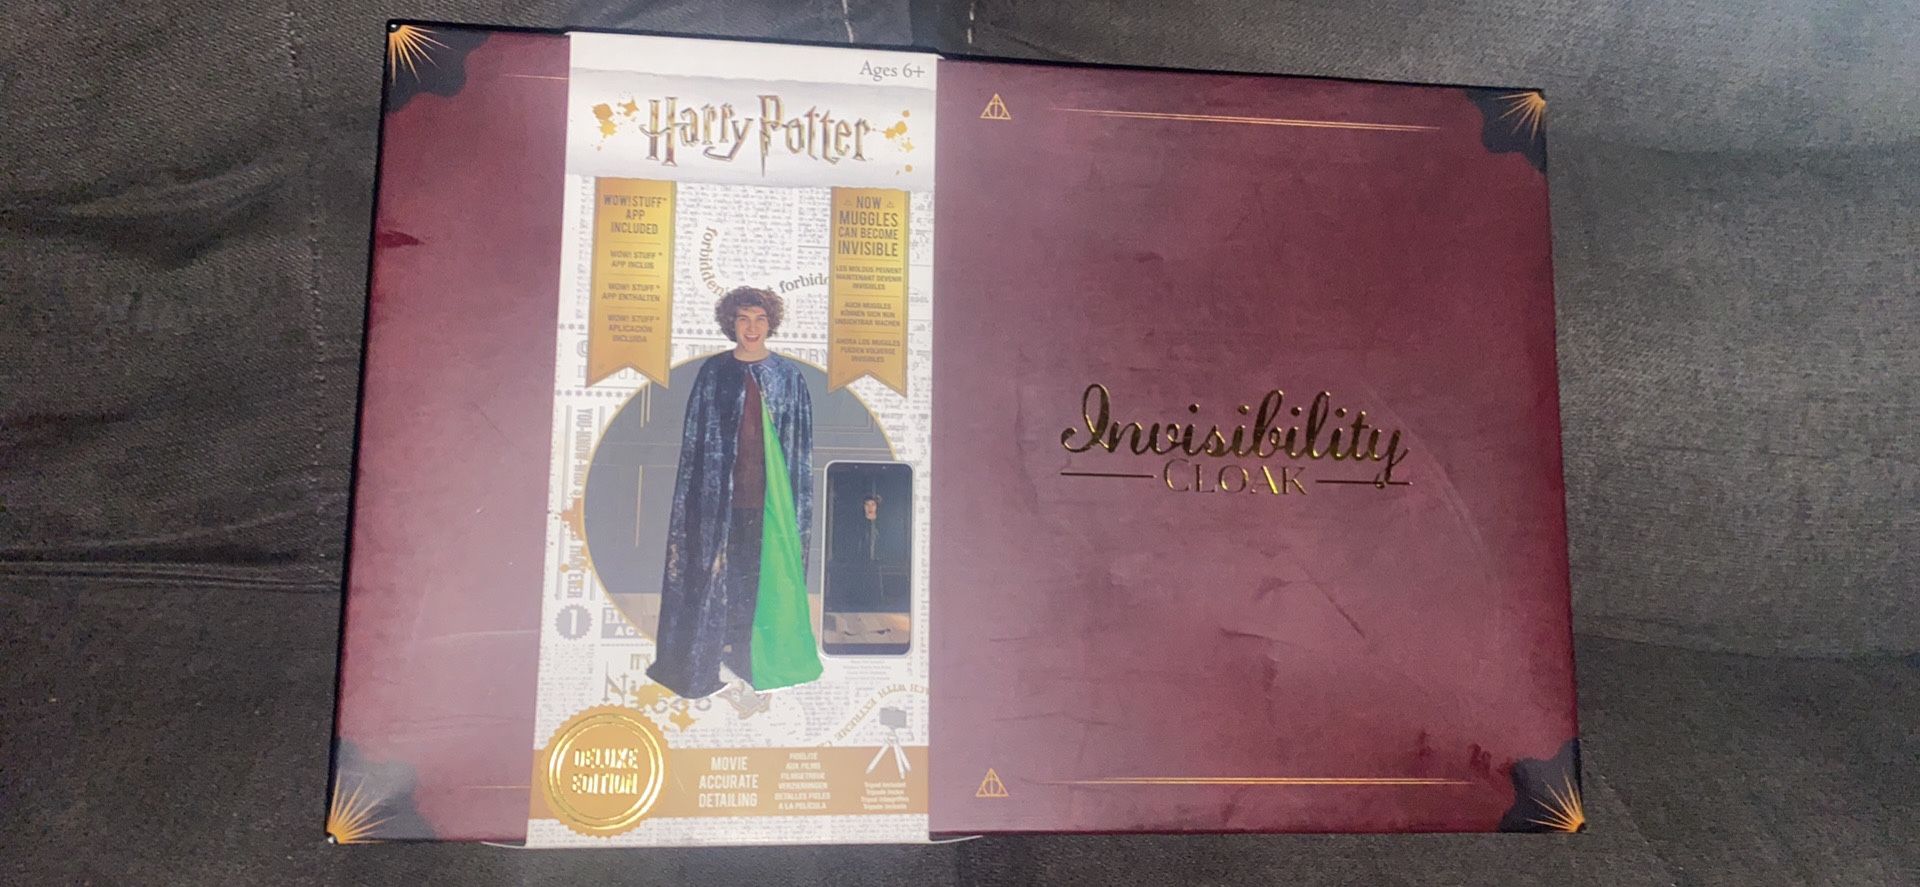 Harry potter deluxe invisibility cloak